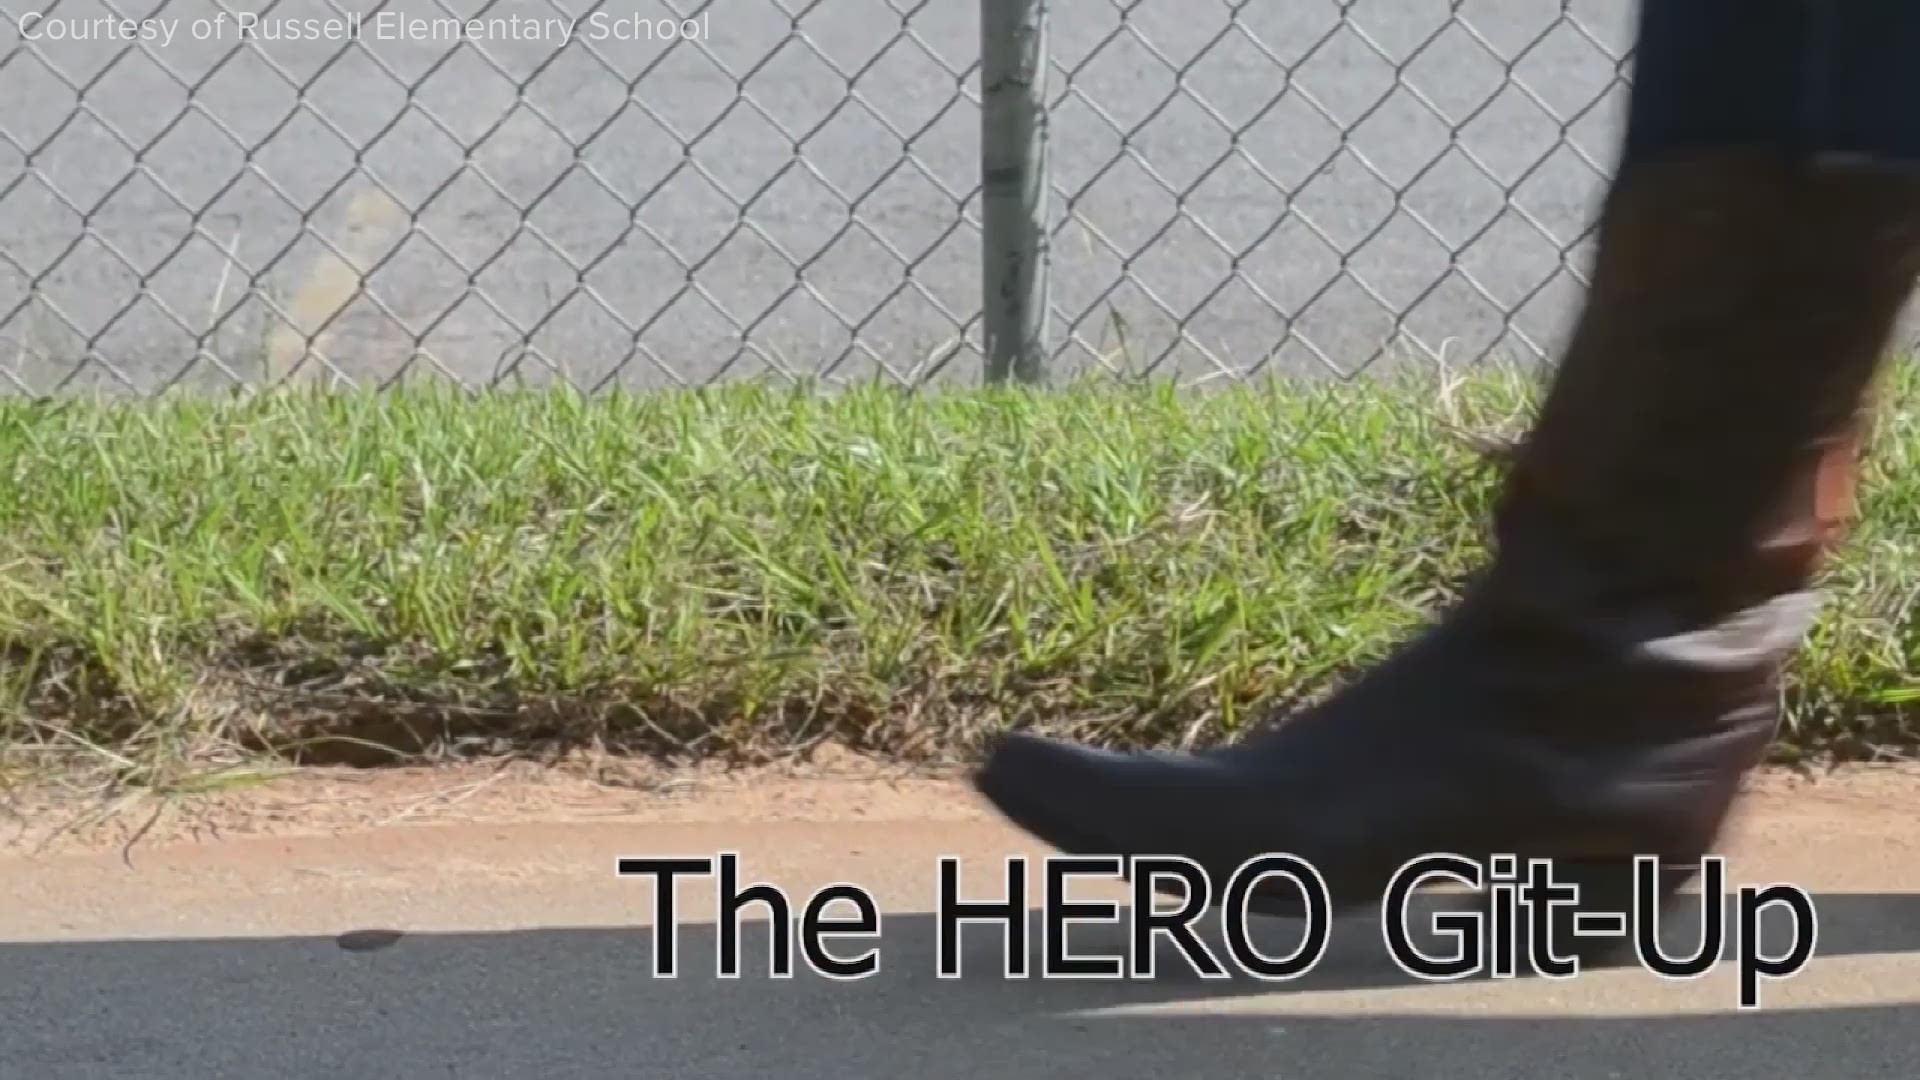 Curtin Singleton and other Russell Elementary staff joined together to make "The HERO Git Up"